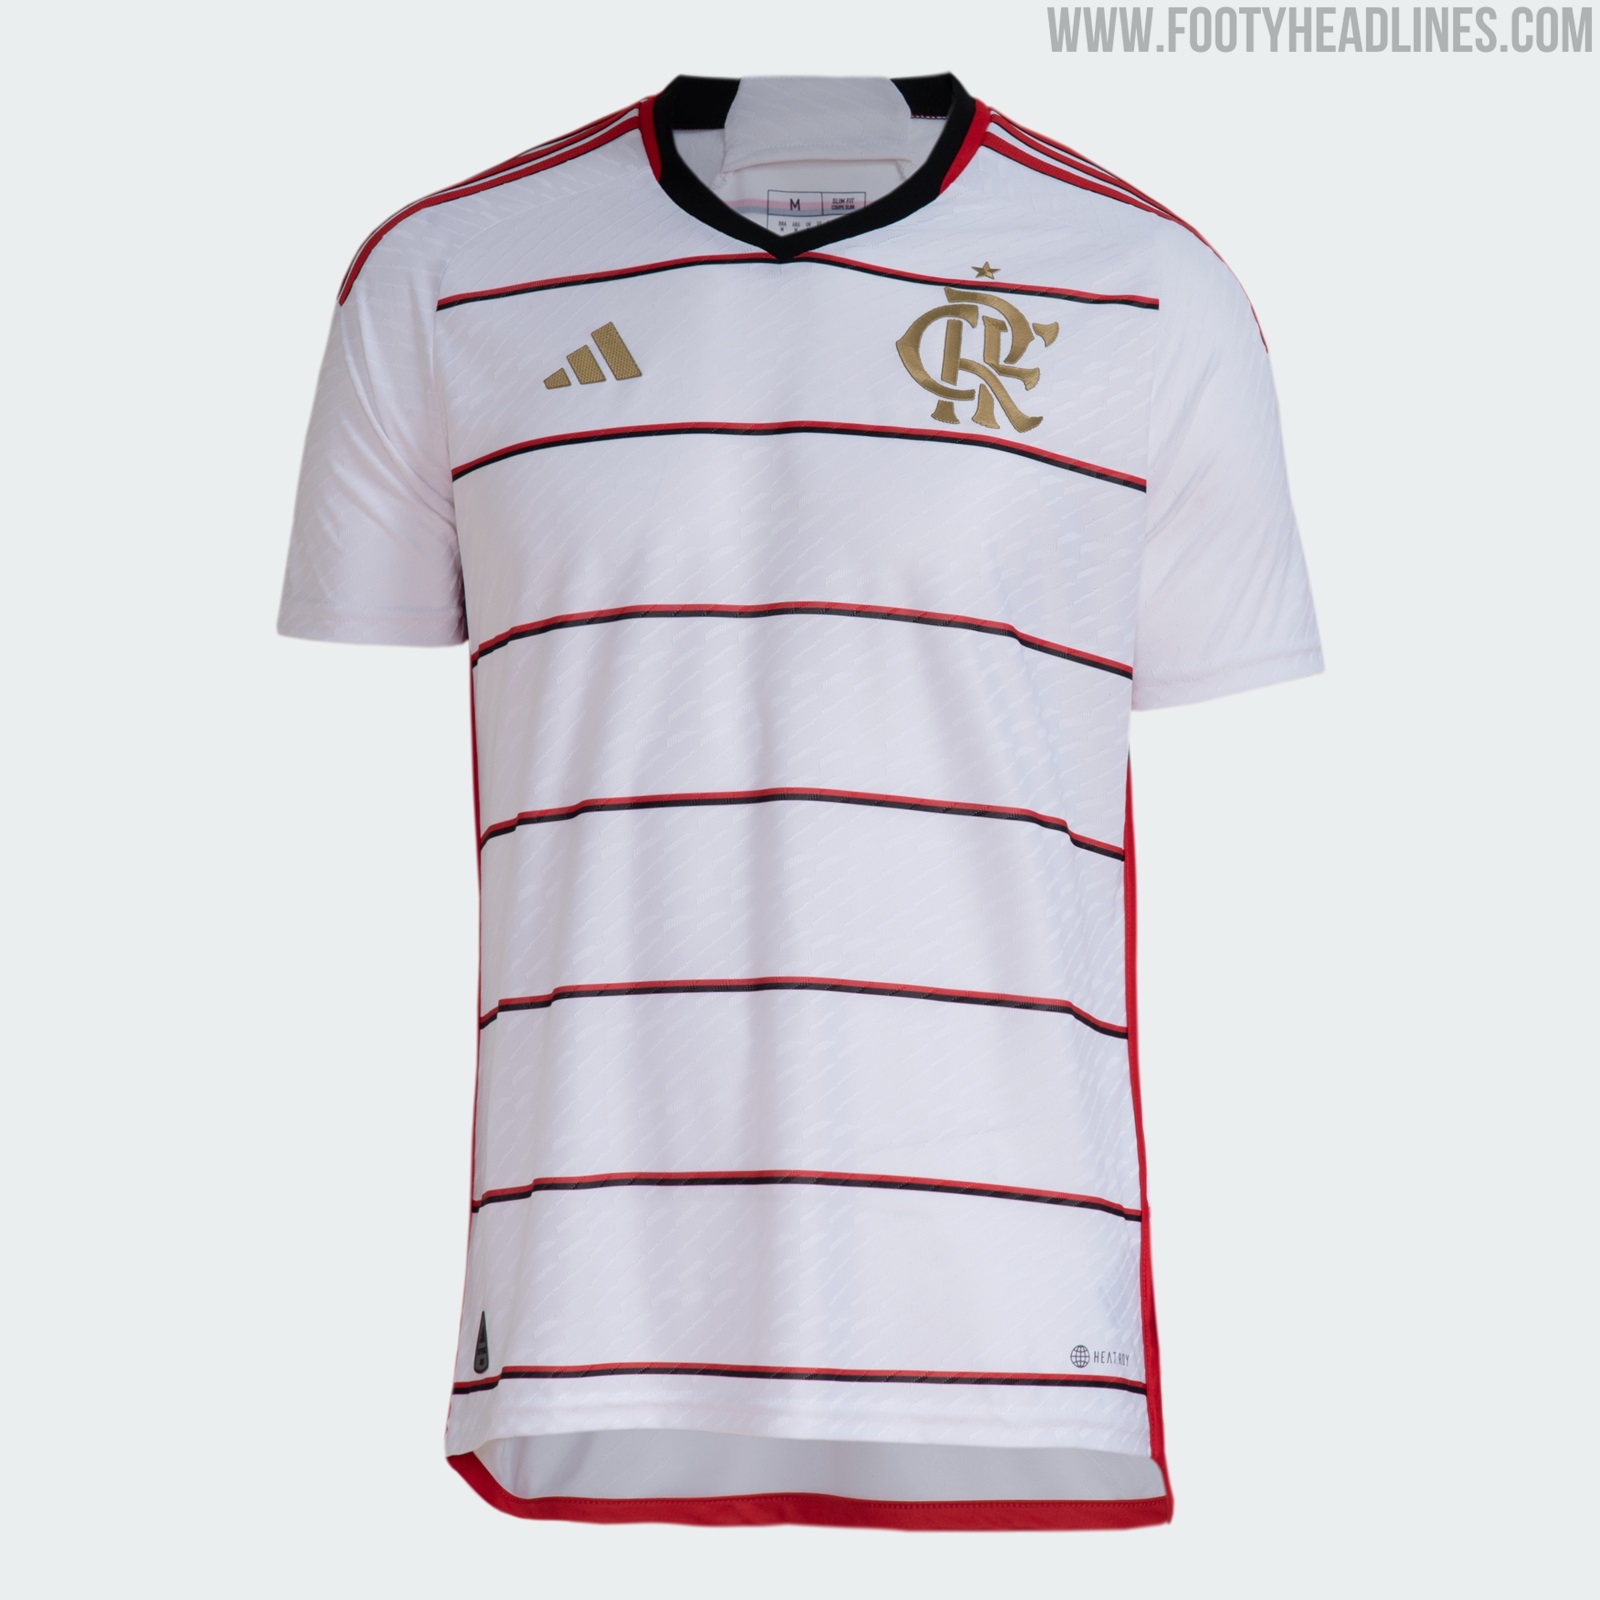 Adidas Flamengo 23-24 Away Kit Voted Best Football Kit of 2023